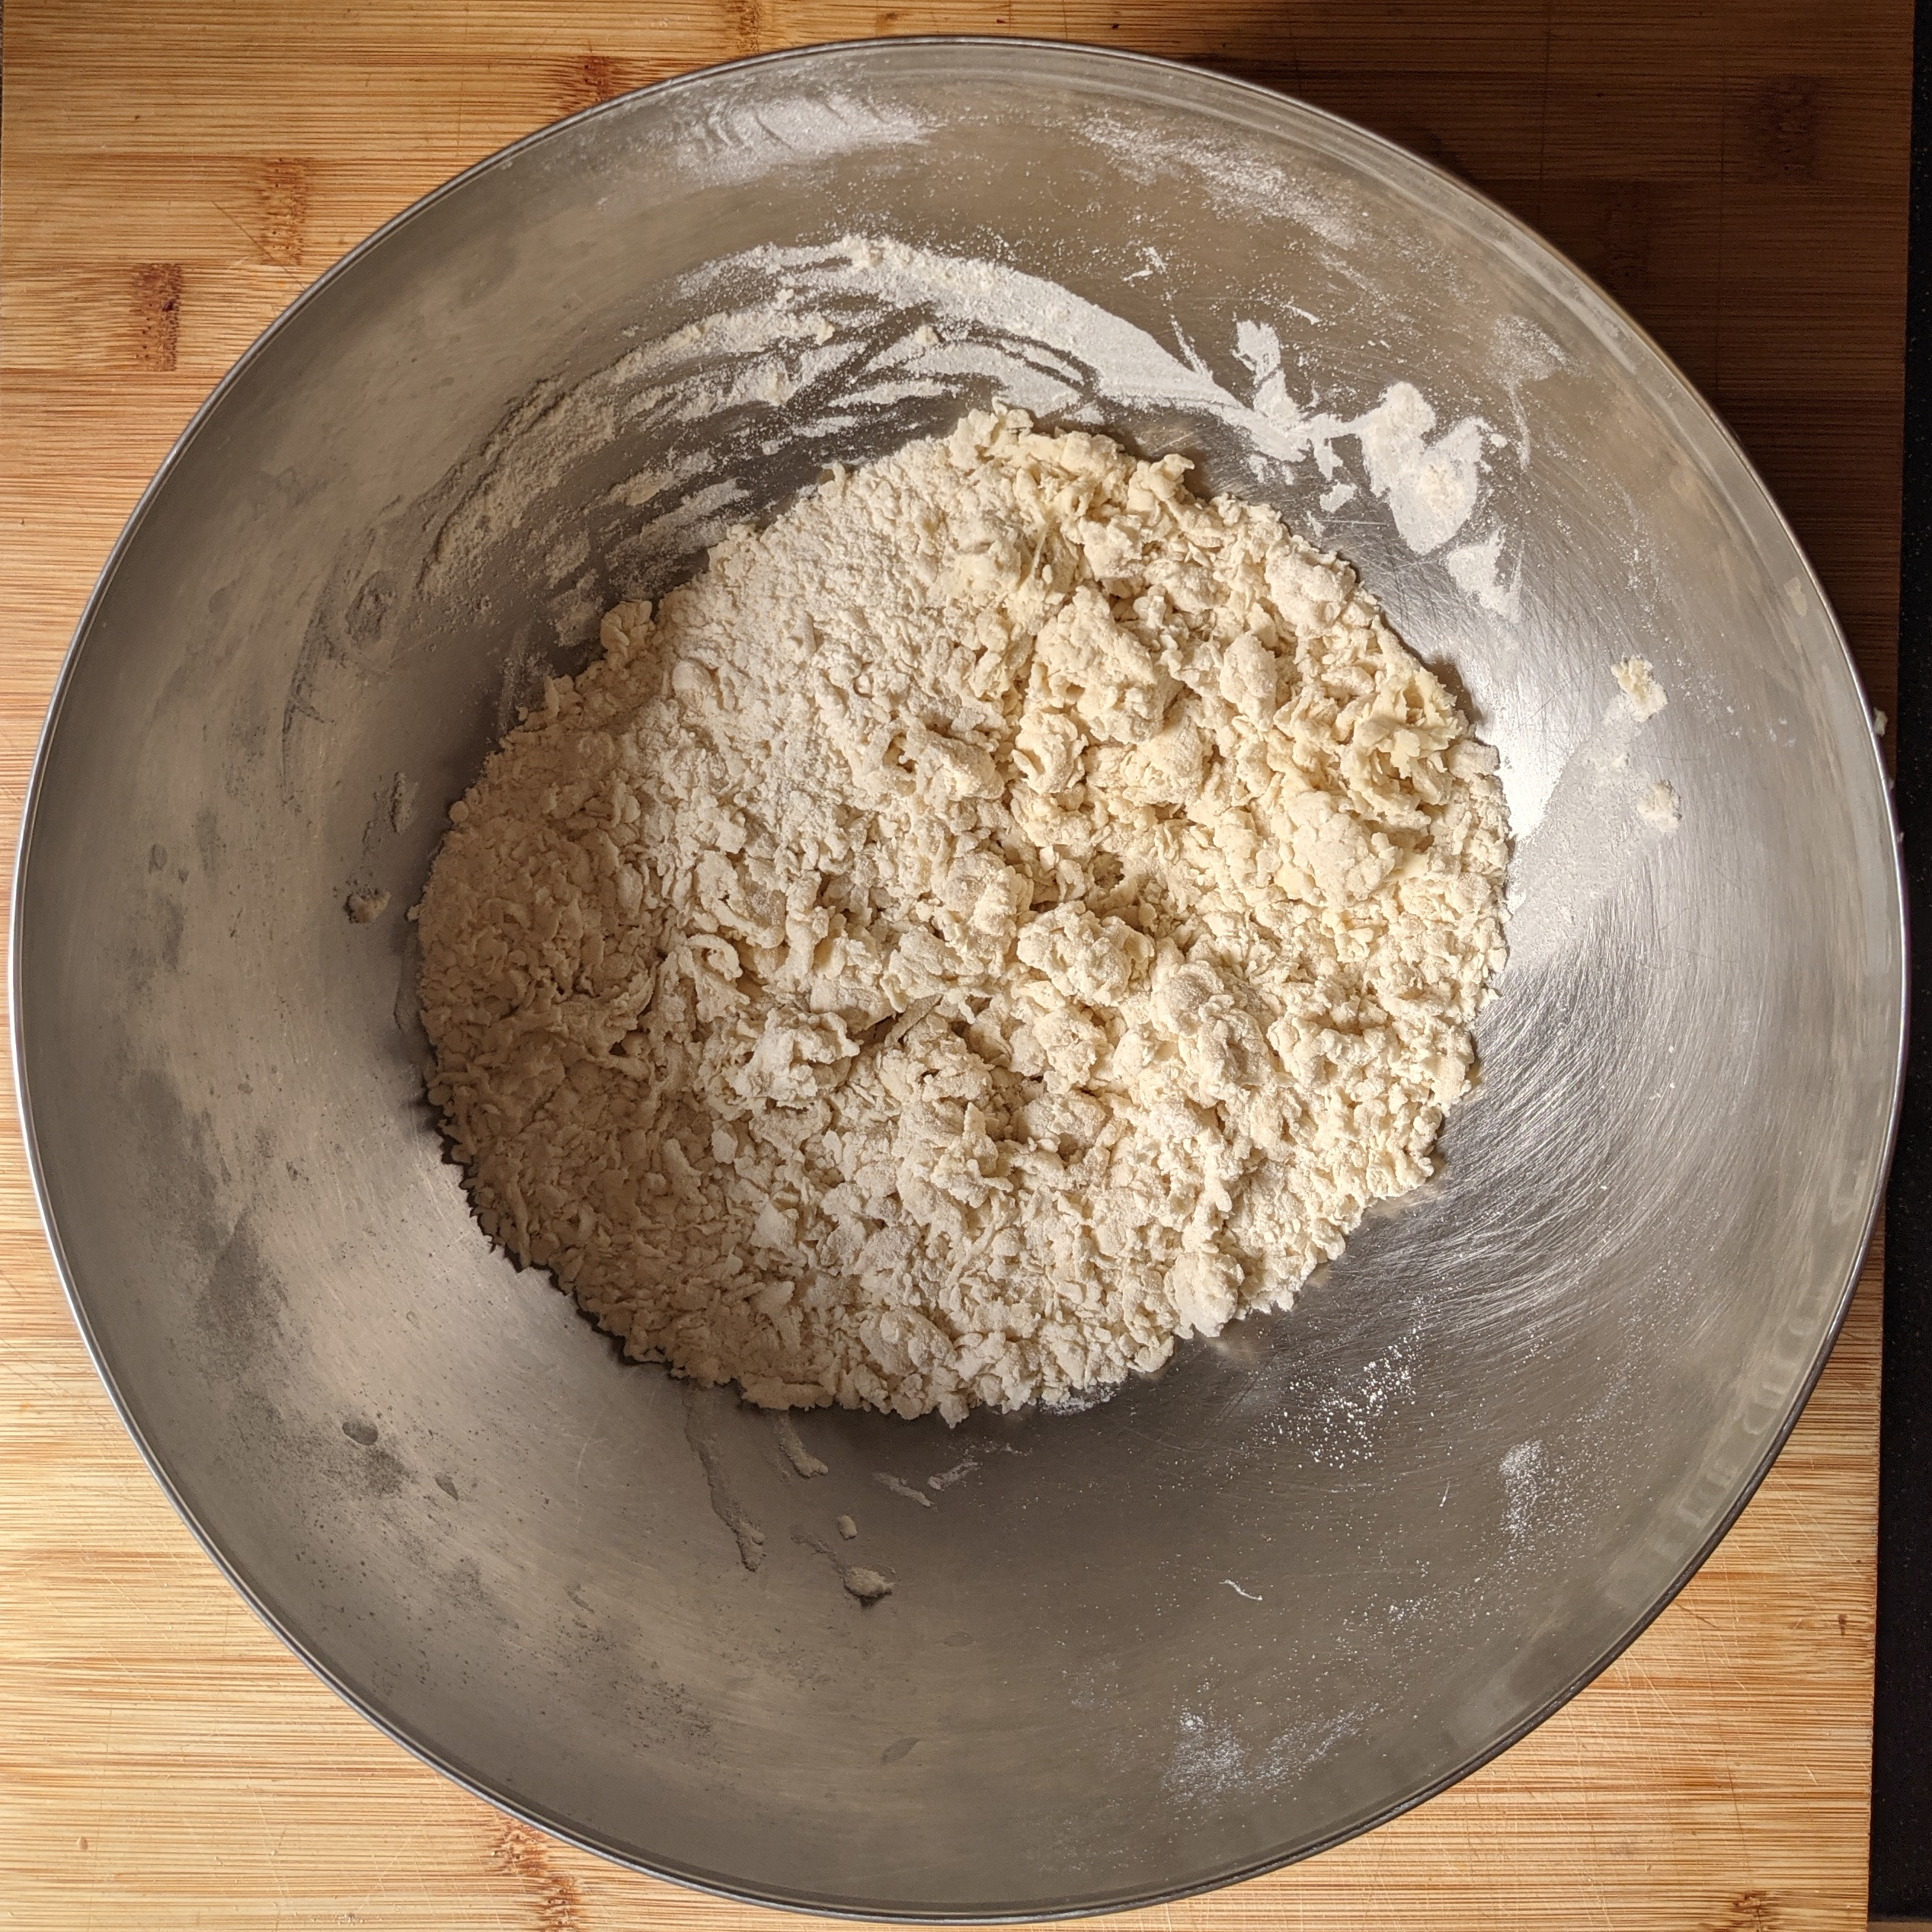 Mixing final: the flour is in small grains